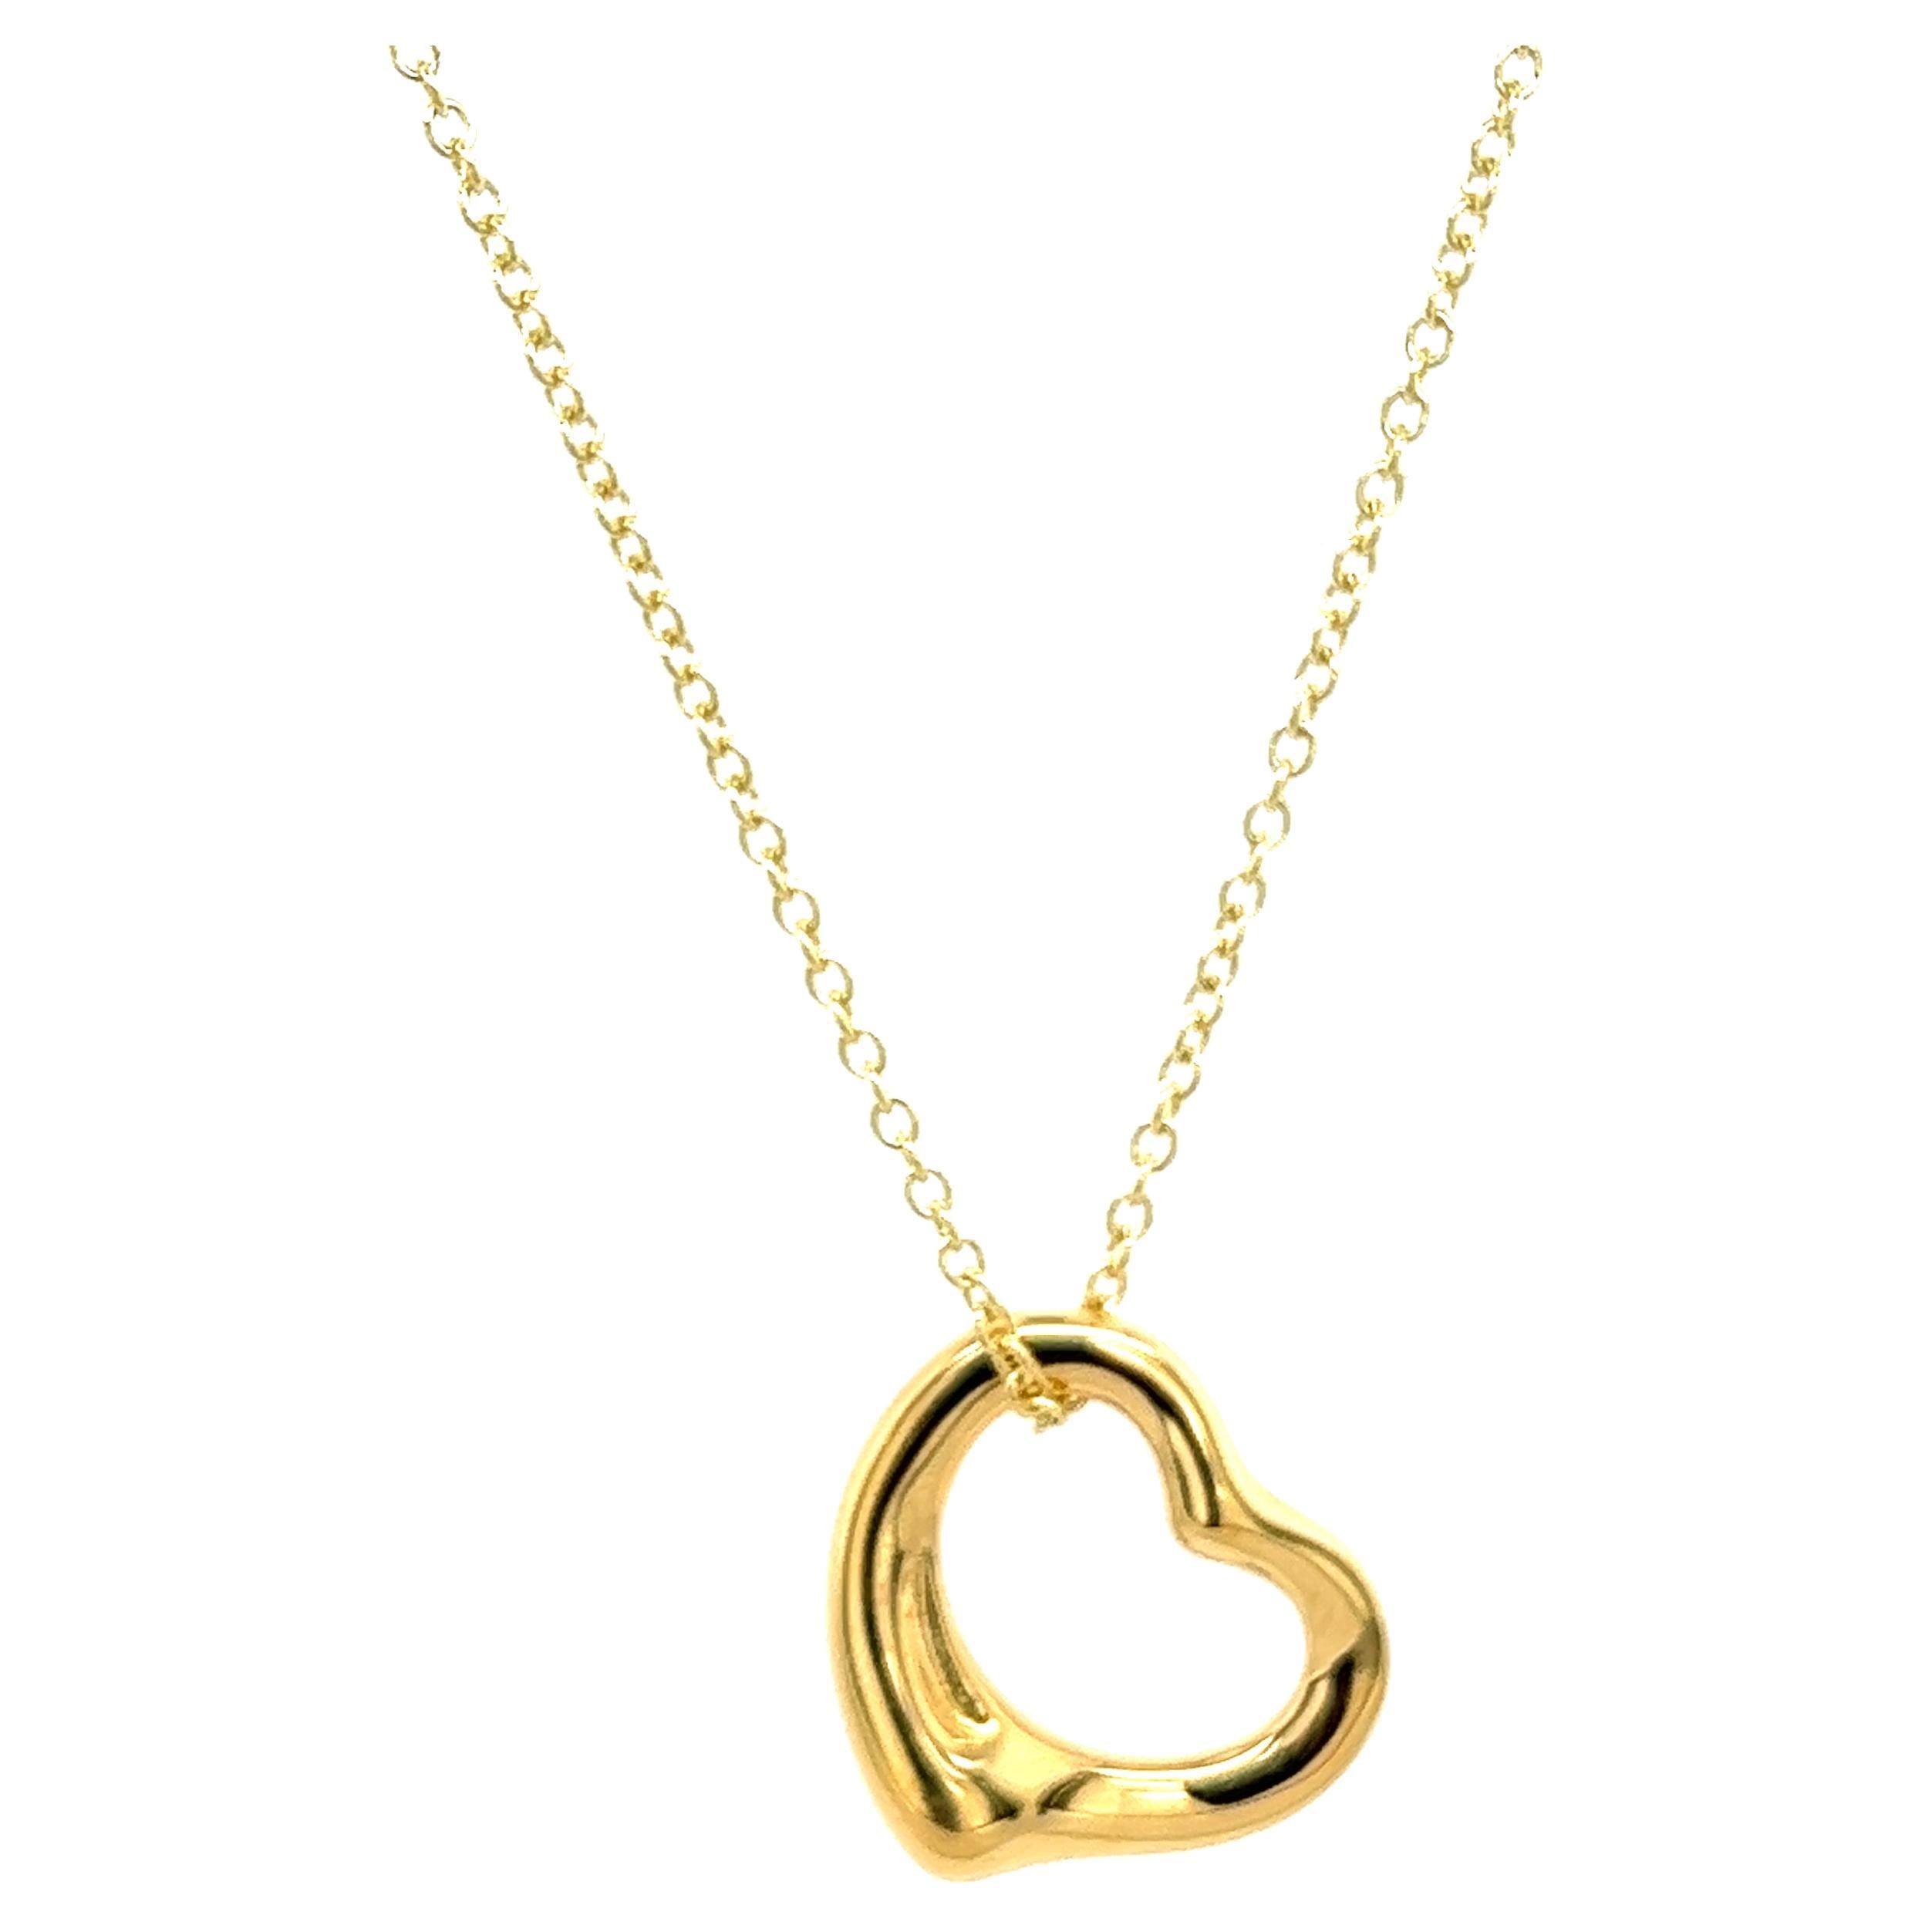 18ct Yellow Gold Heart Shape Pendant Suspended From 18ct Yellow Gold Chain 20"